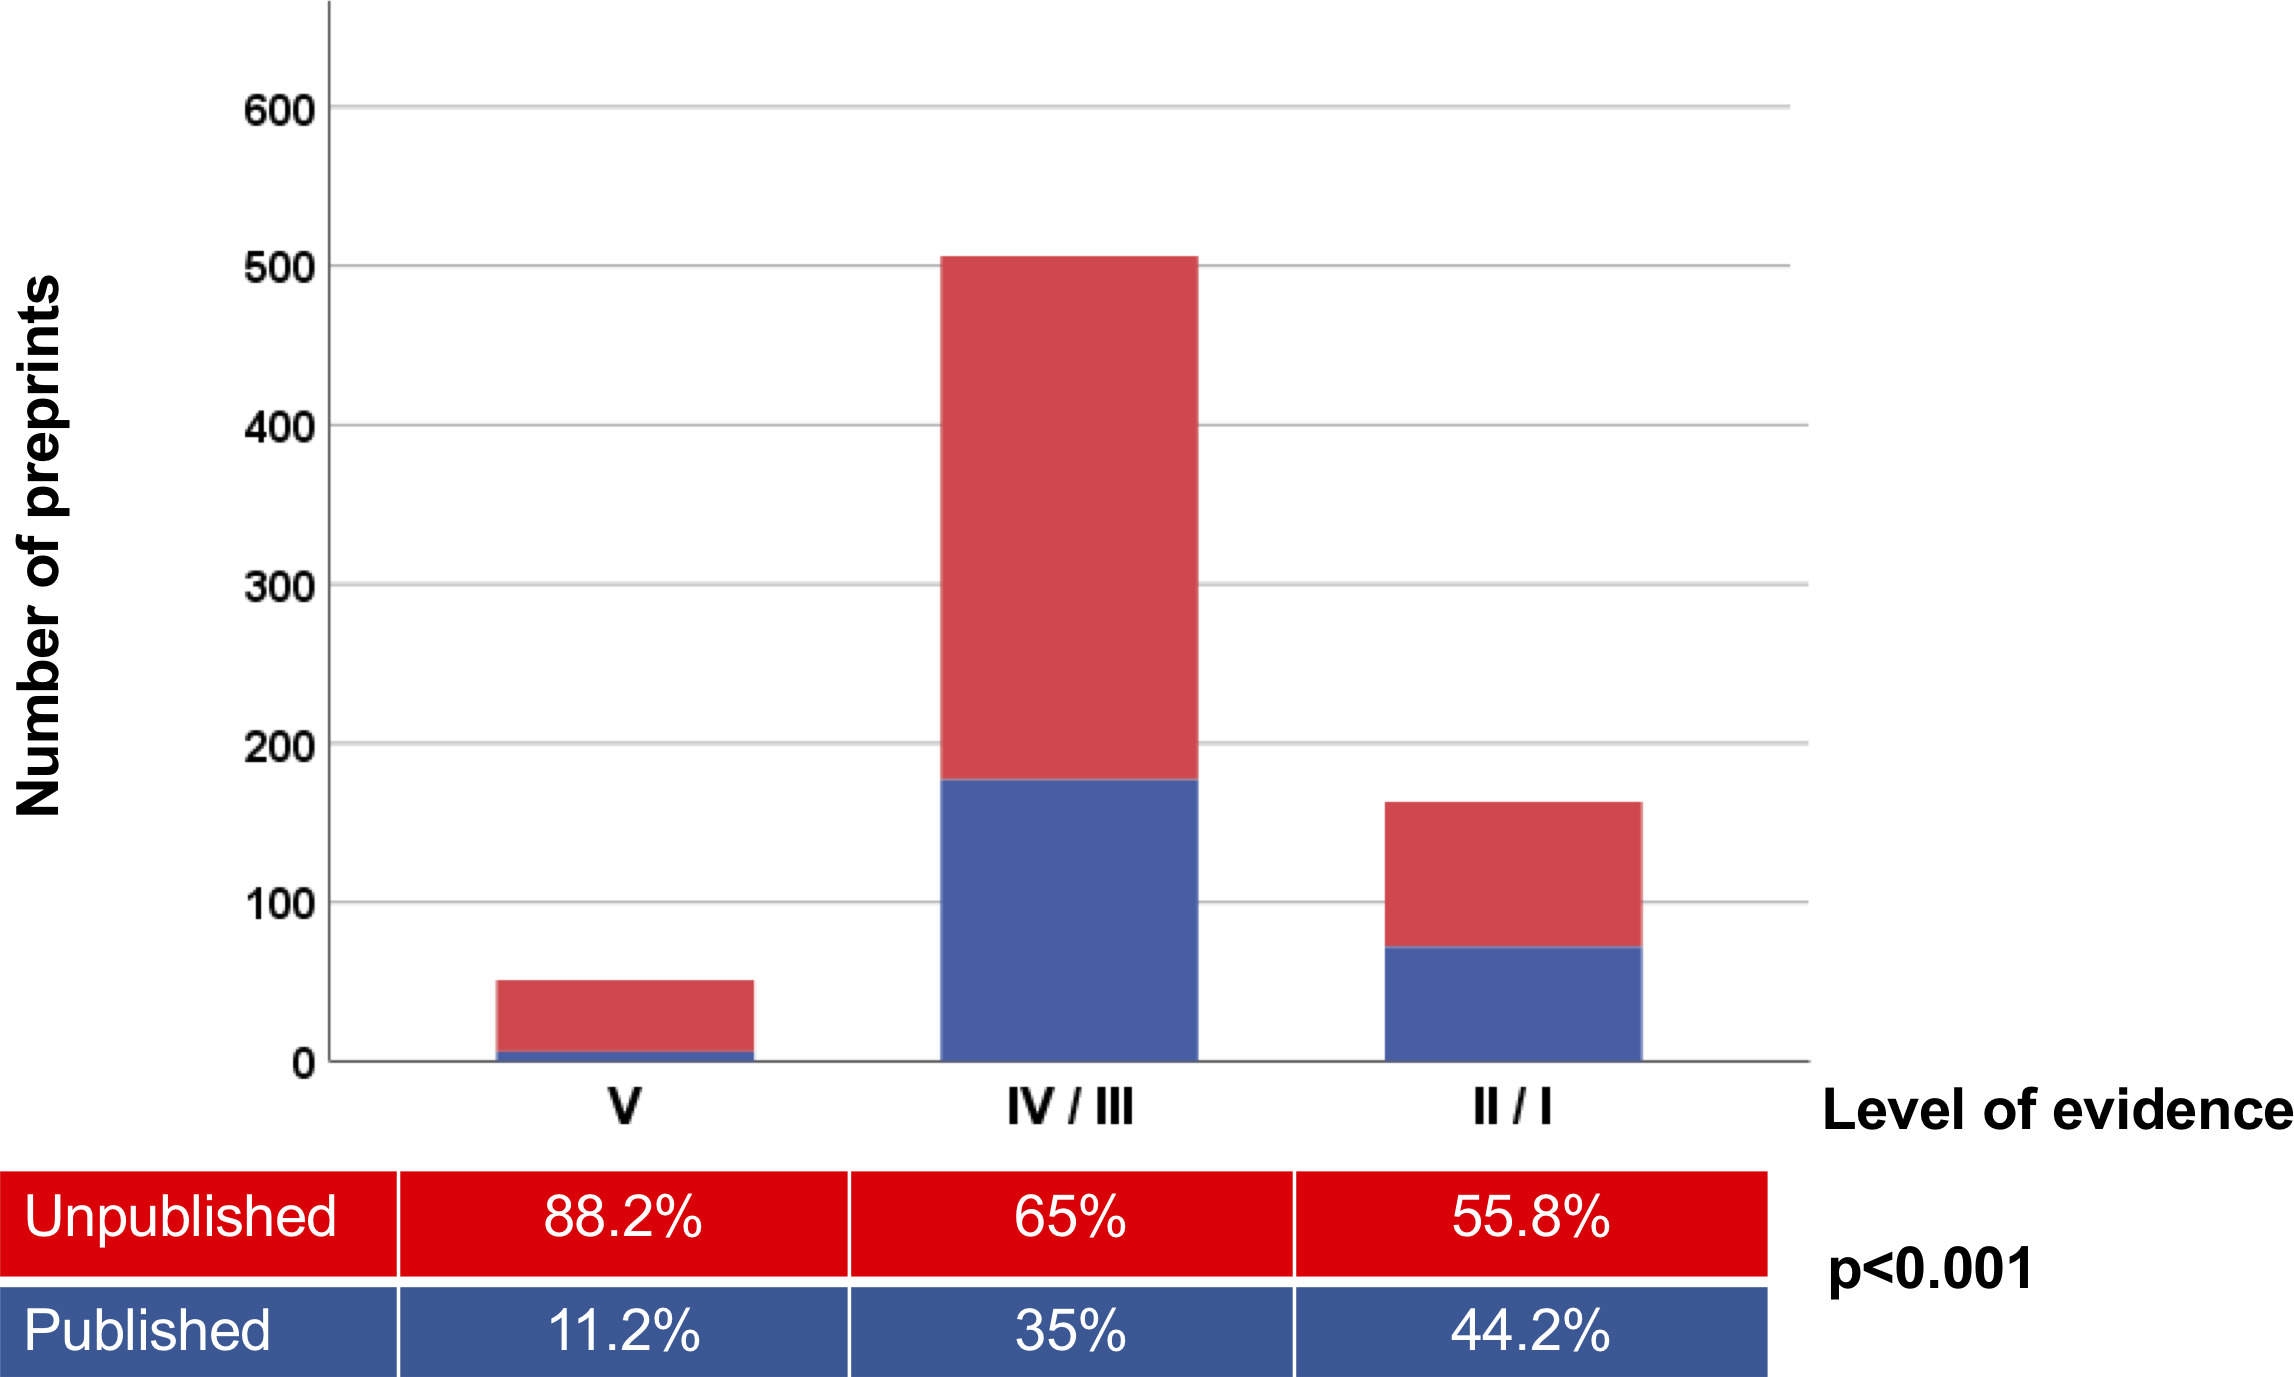 Fig. 4 
          Subsequent definitive publication of clinical research according to level of evidence. The bar chart depicts the number (%) of subsequently published preprints (blue) and unpublished preprints (red) covering clinical research according to the level of evidence (I to V).
        